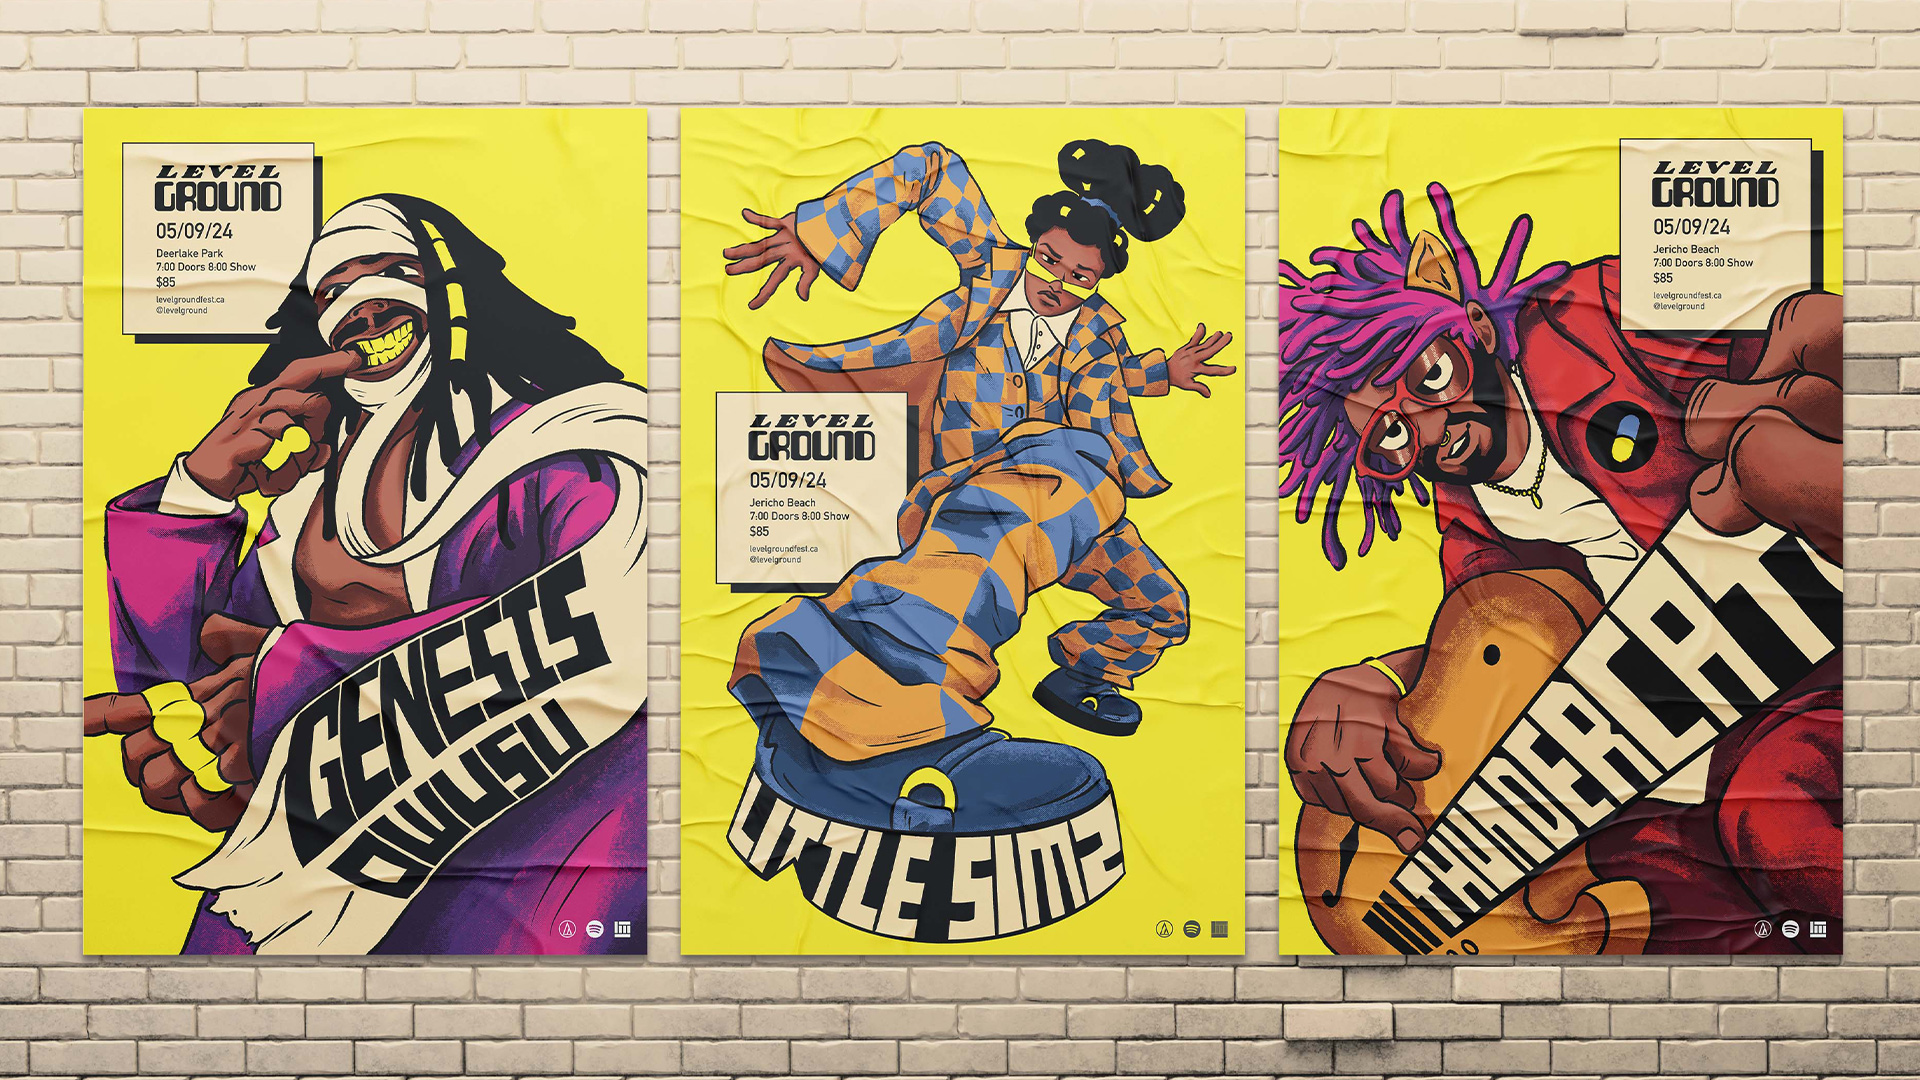 3 posters featuring illustrations of musical artists in exaggerated poses.